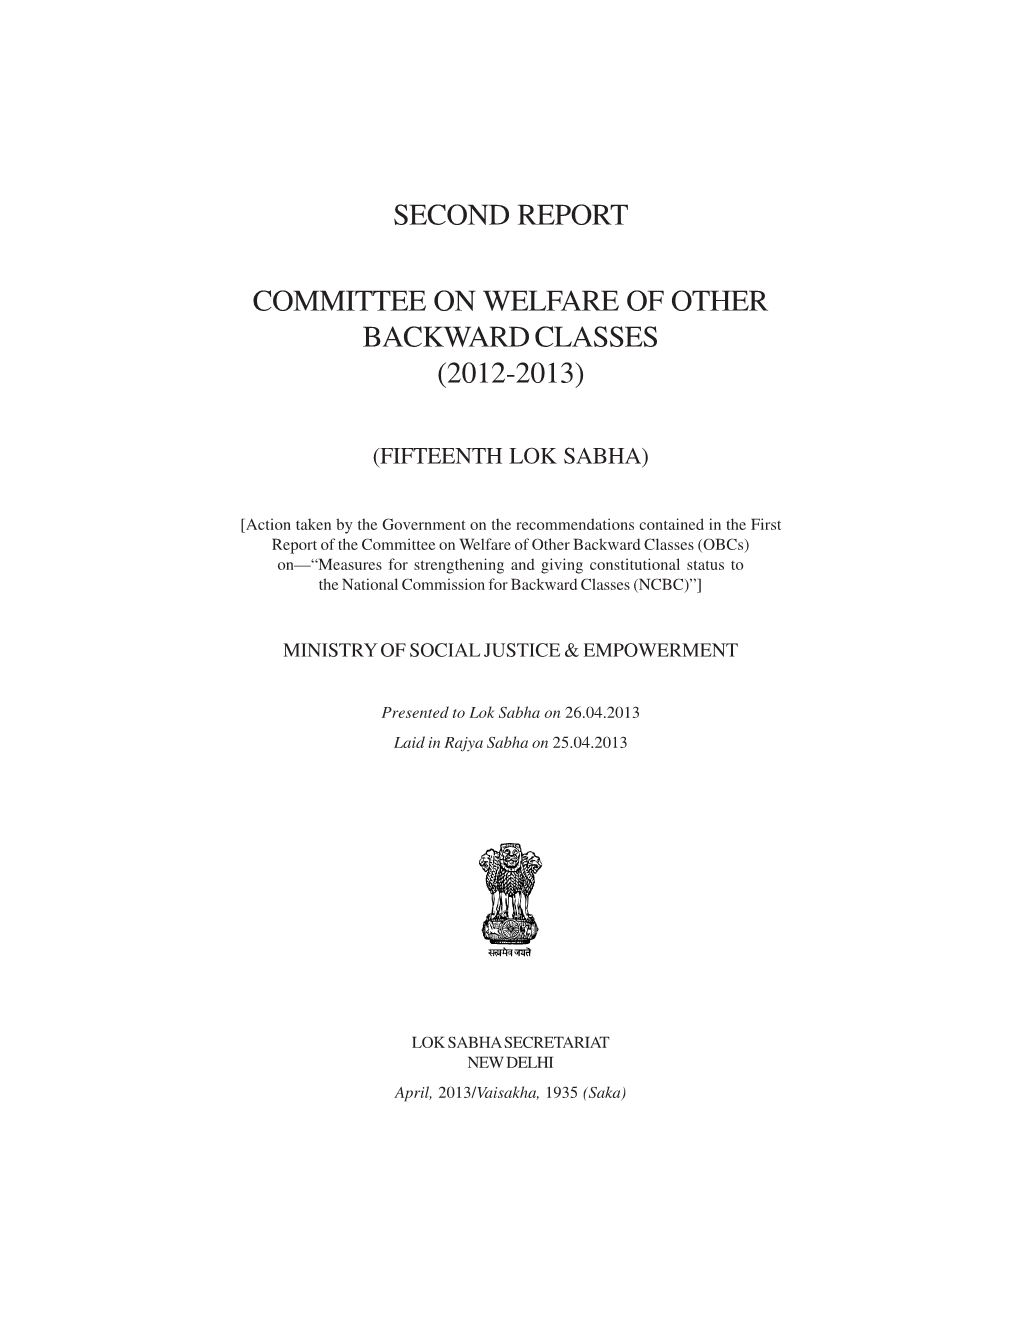 Second Report Committee on Welfare of Other Backward